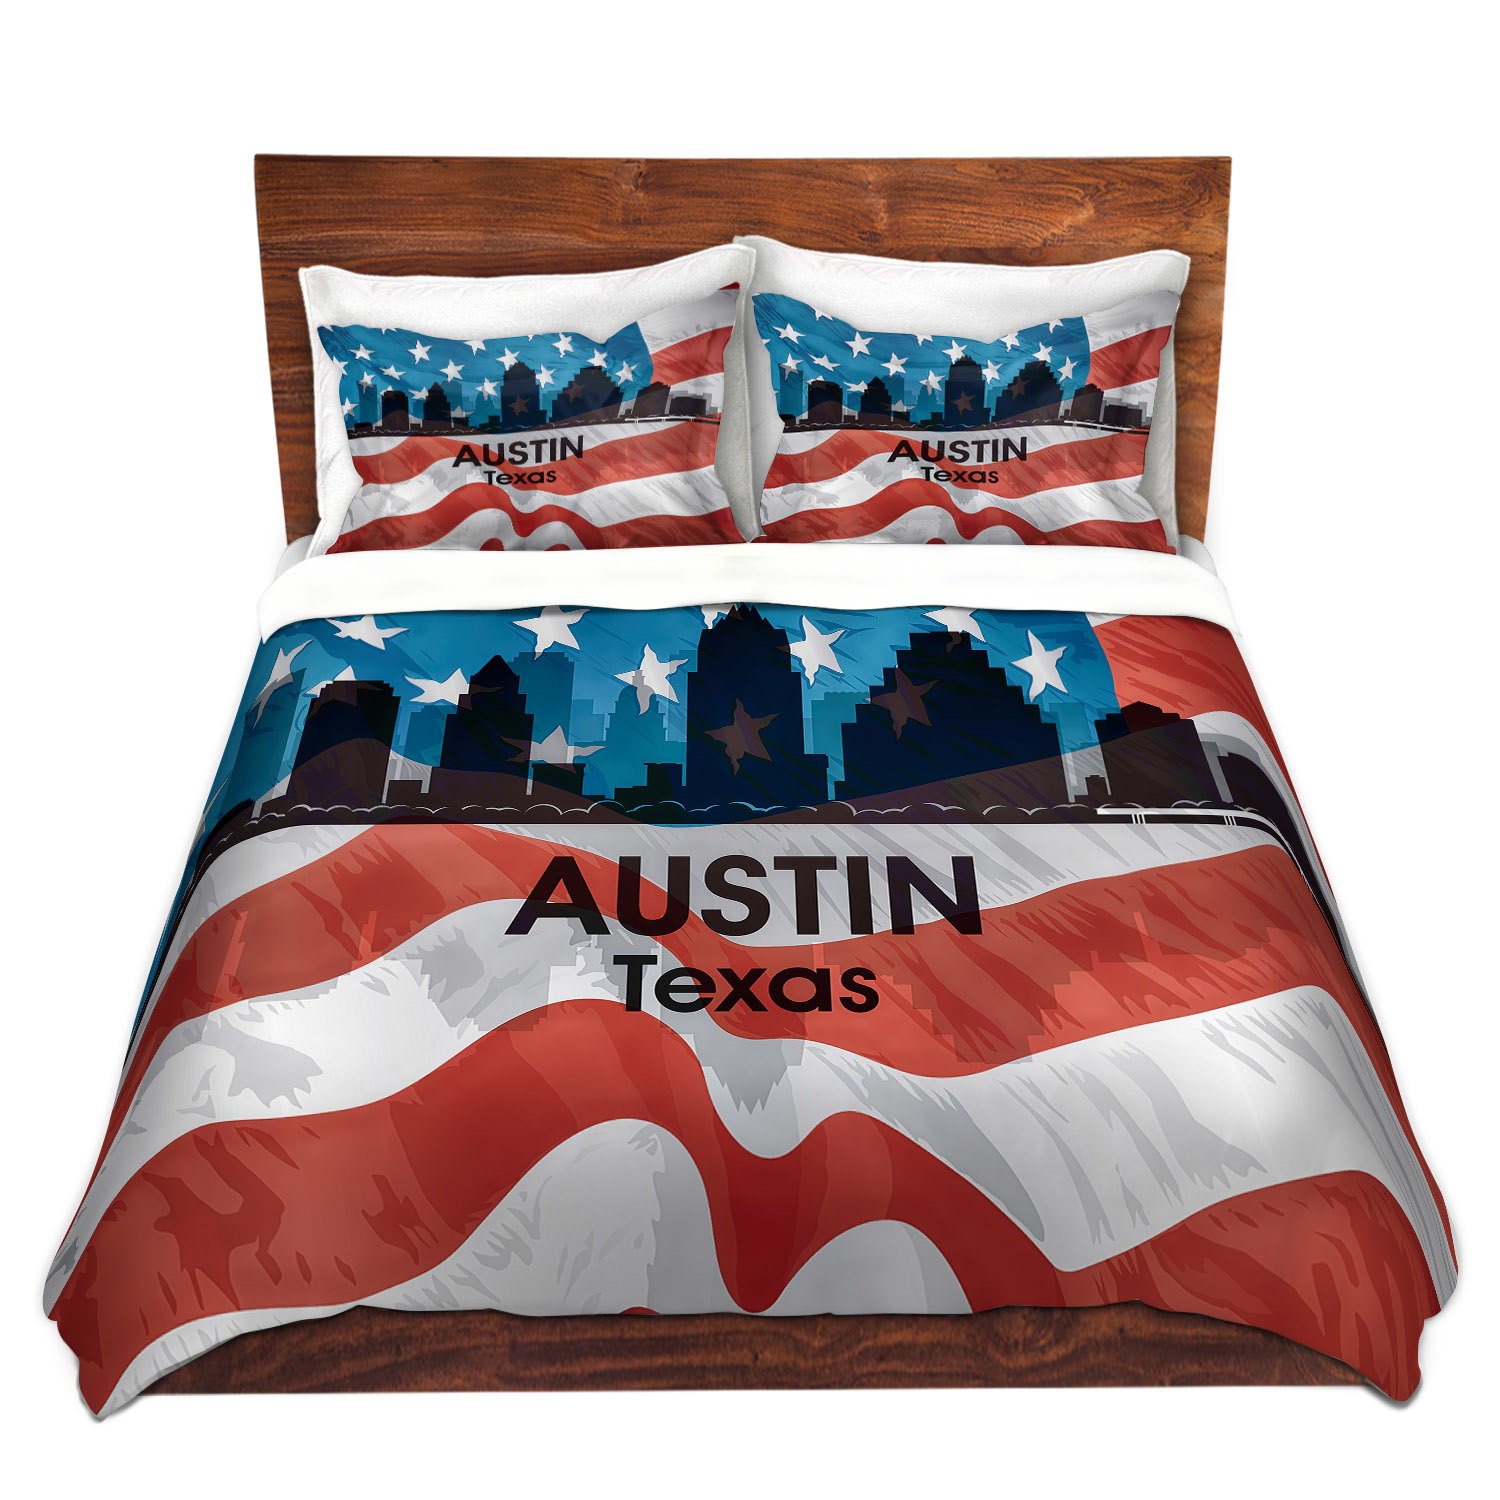 Dianoche Microfiber Duvet Covers By Angelina Vick - City Vi Austin Texas